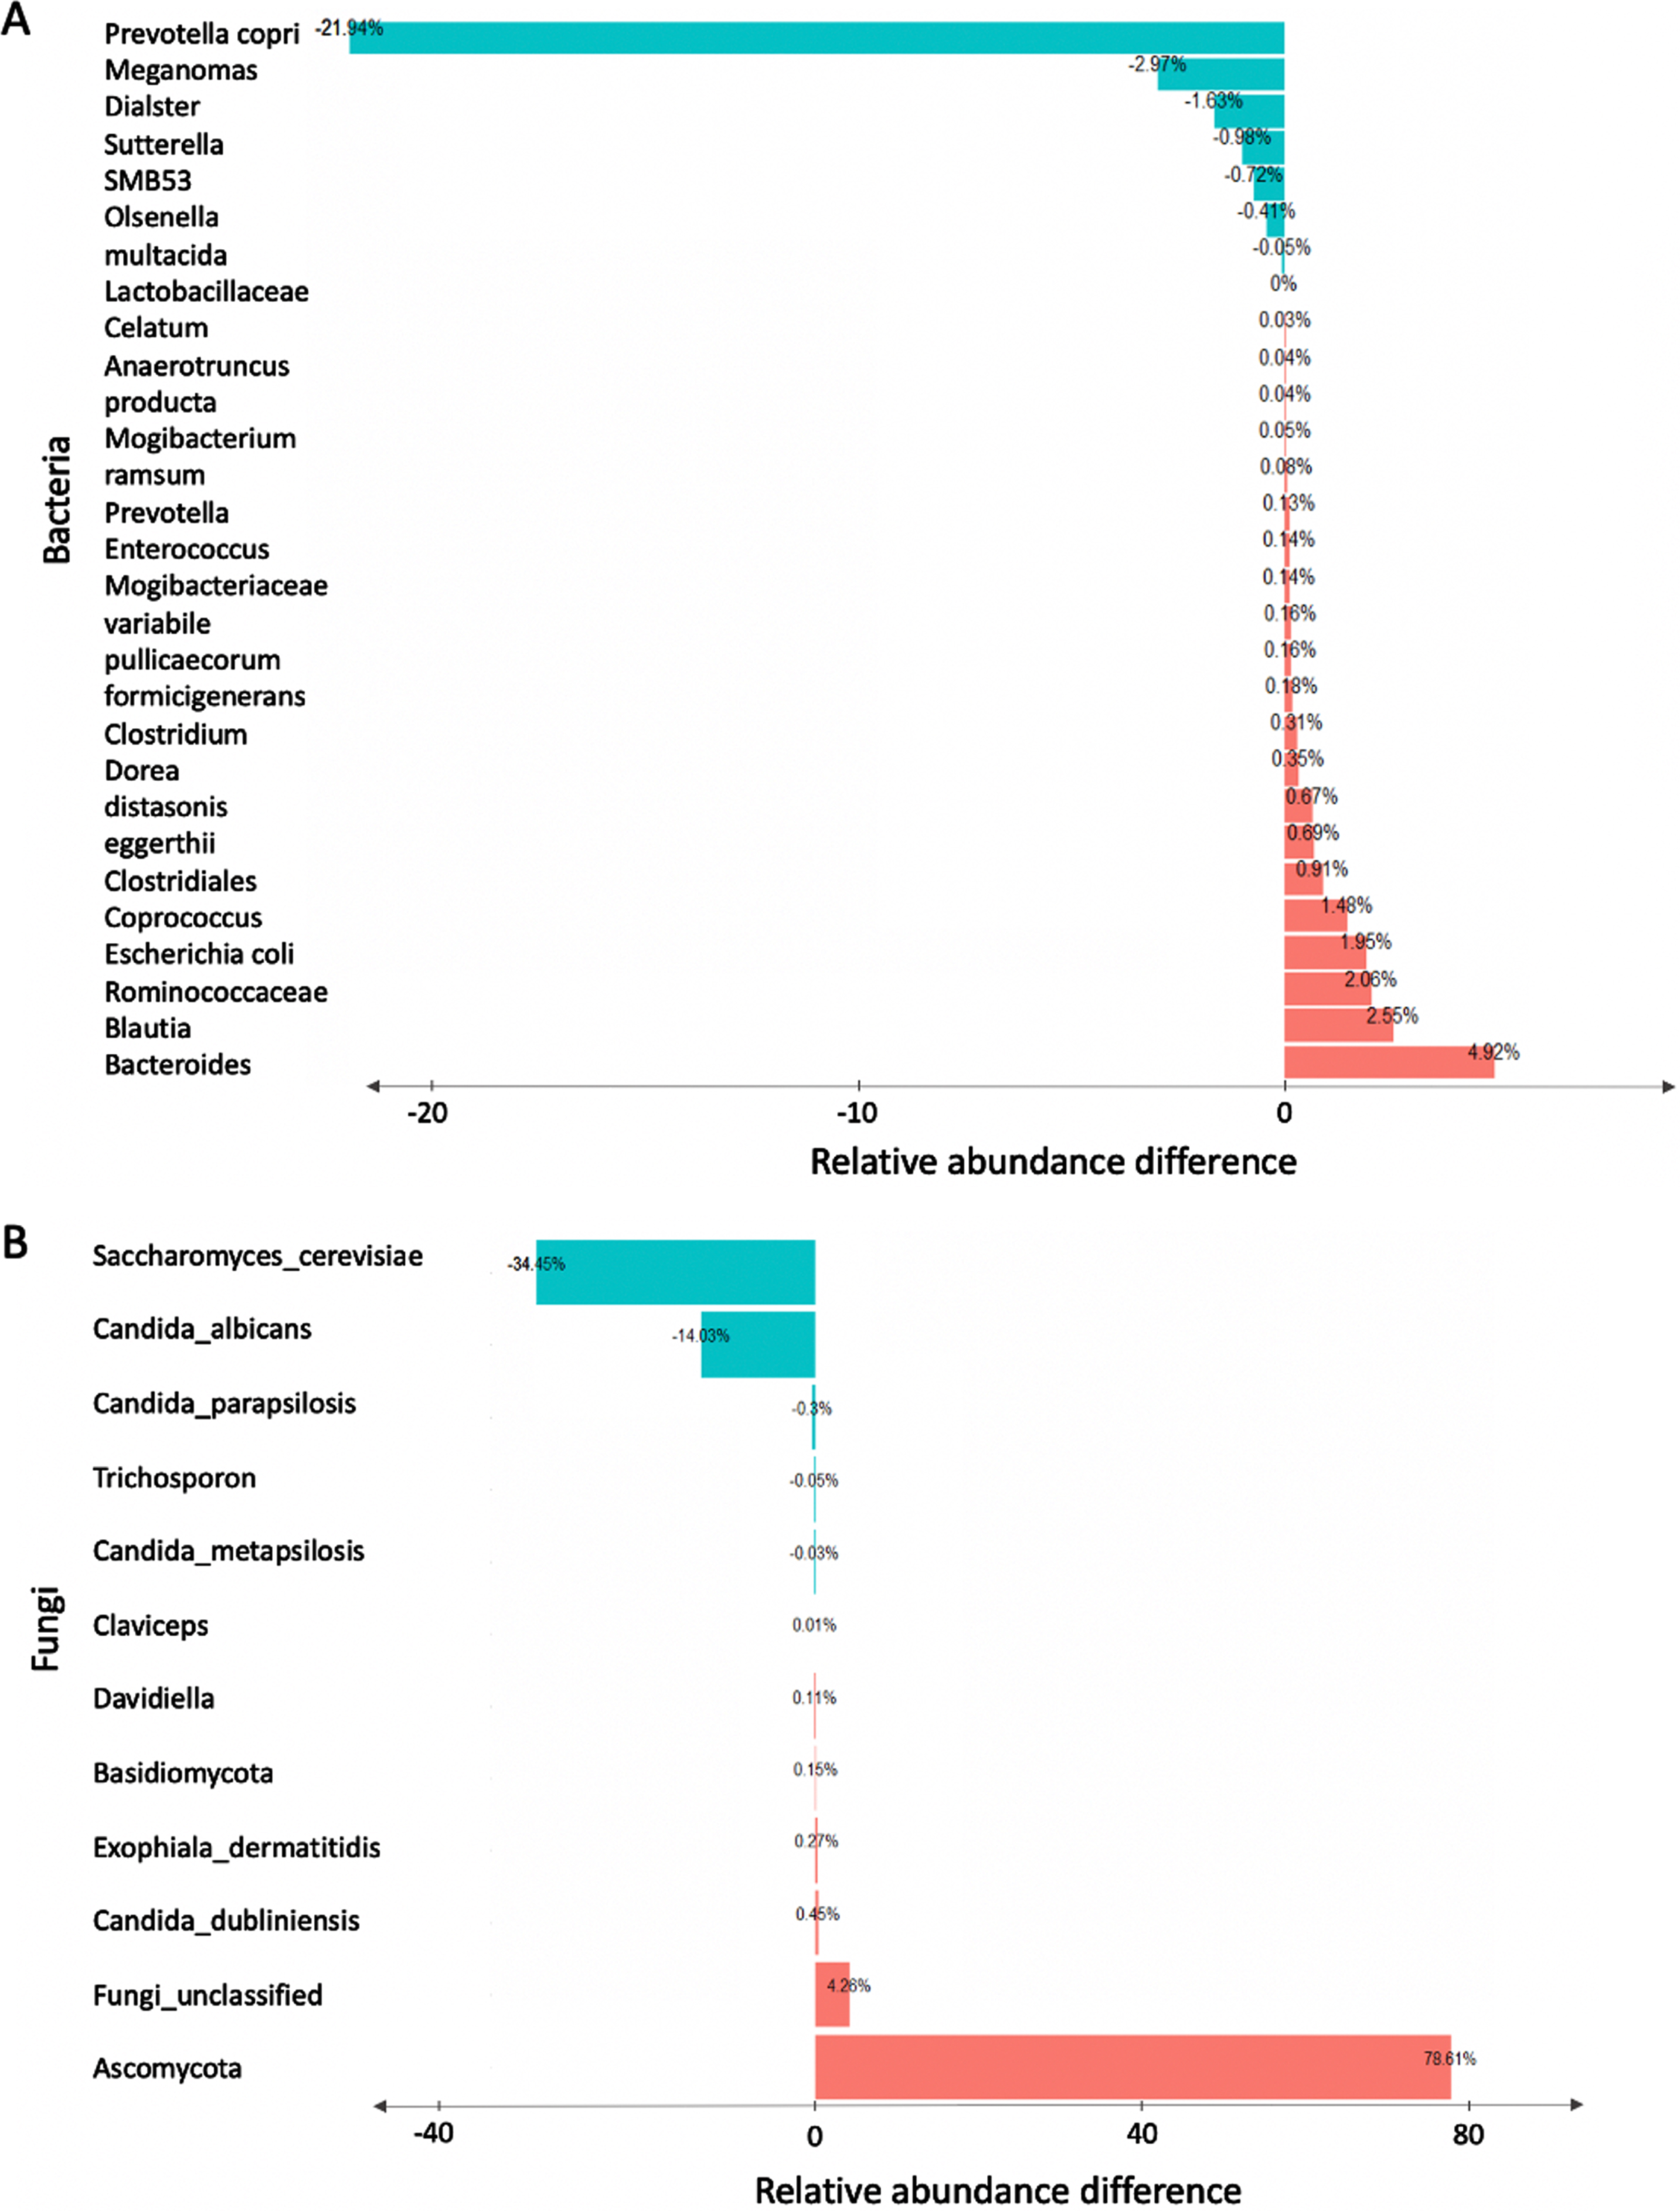 Investigation of significant bacterial and fungal relative abundance difference between young and older individuals. Wilcoxon sum rank test was used to test the relative abundance difference for each taxon. P-values were adjusted using Benjamini and Hochberg False Discovery Rate (FDR) method. The bar plot reports the relative abundance differences between older and young human subjects for significant taxa for both the bacterial (A) and fungal (B) genera.